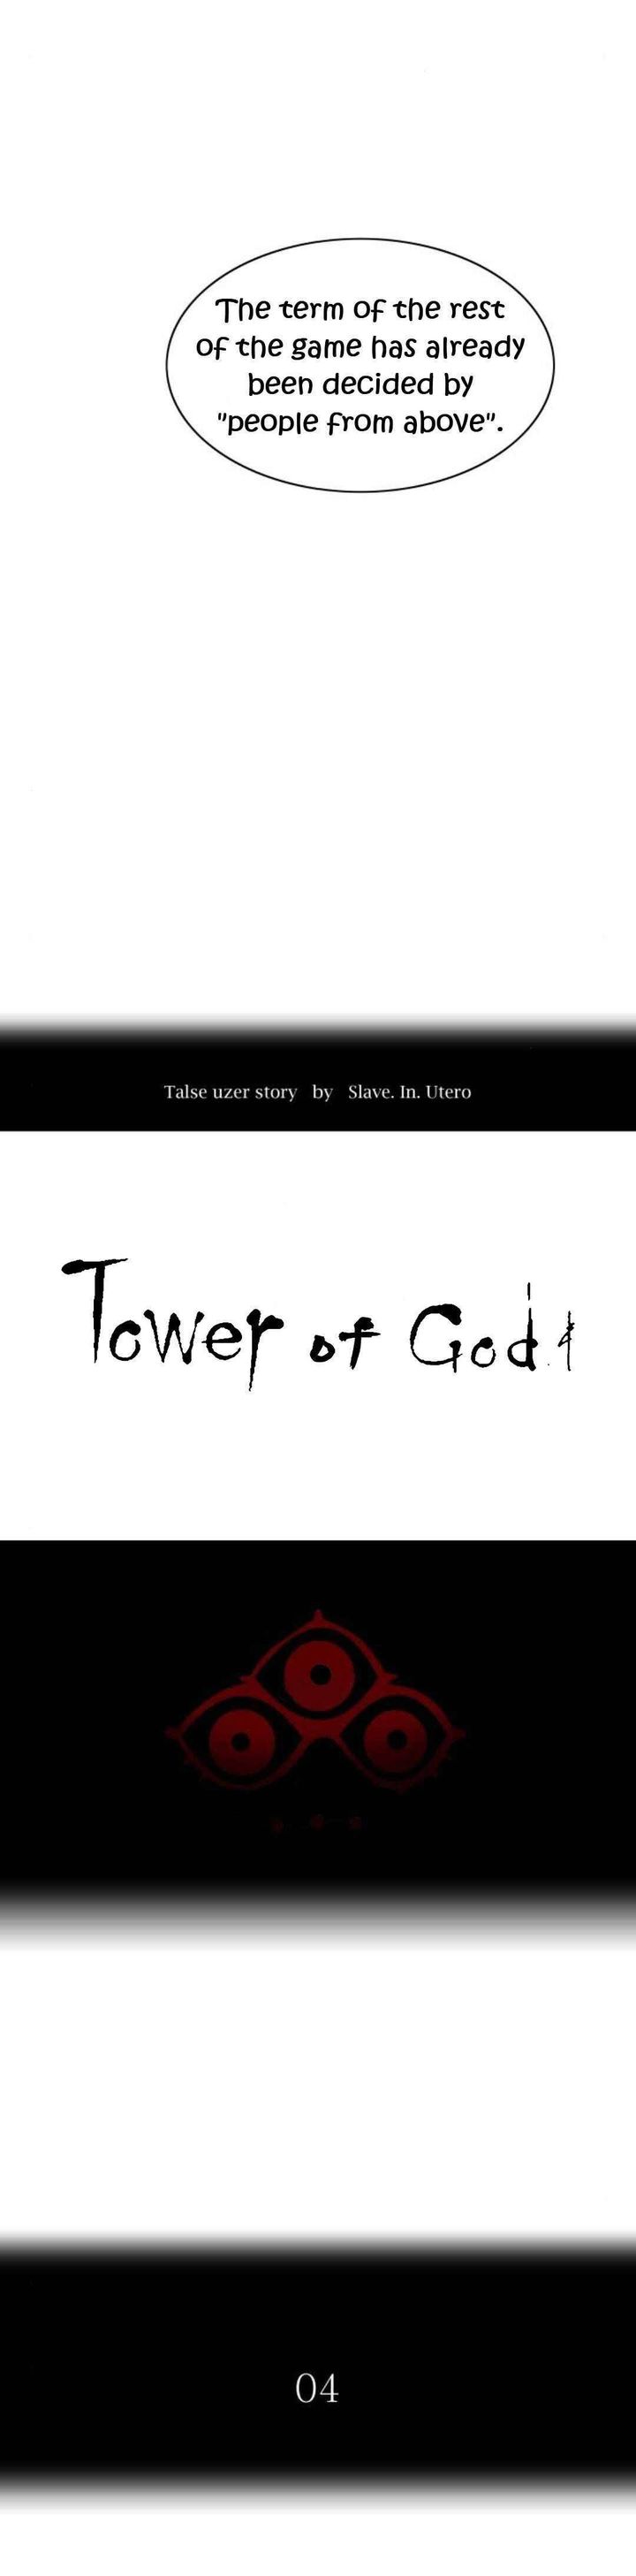 tower_of_god_490_6